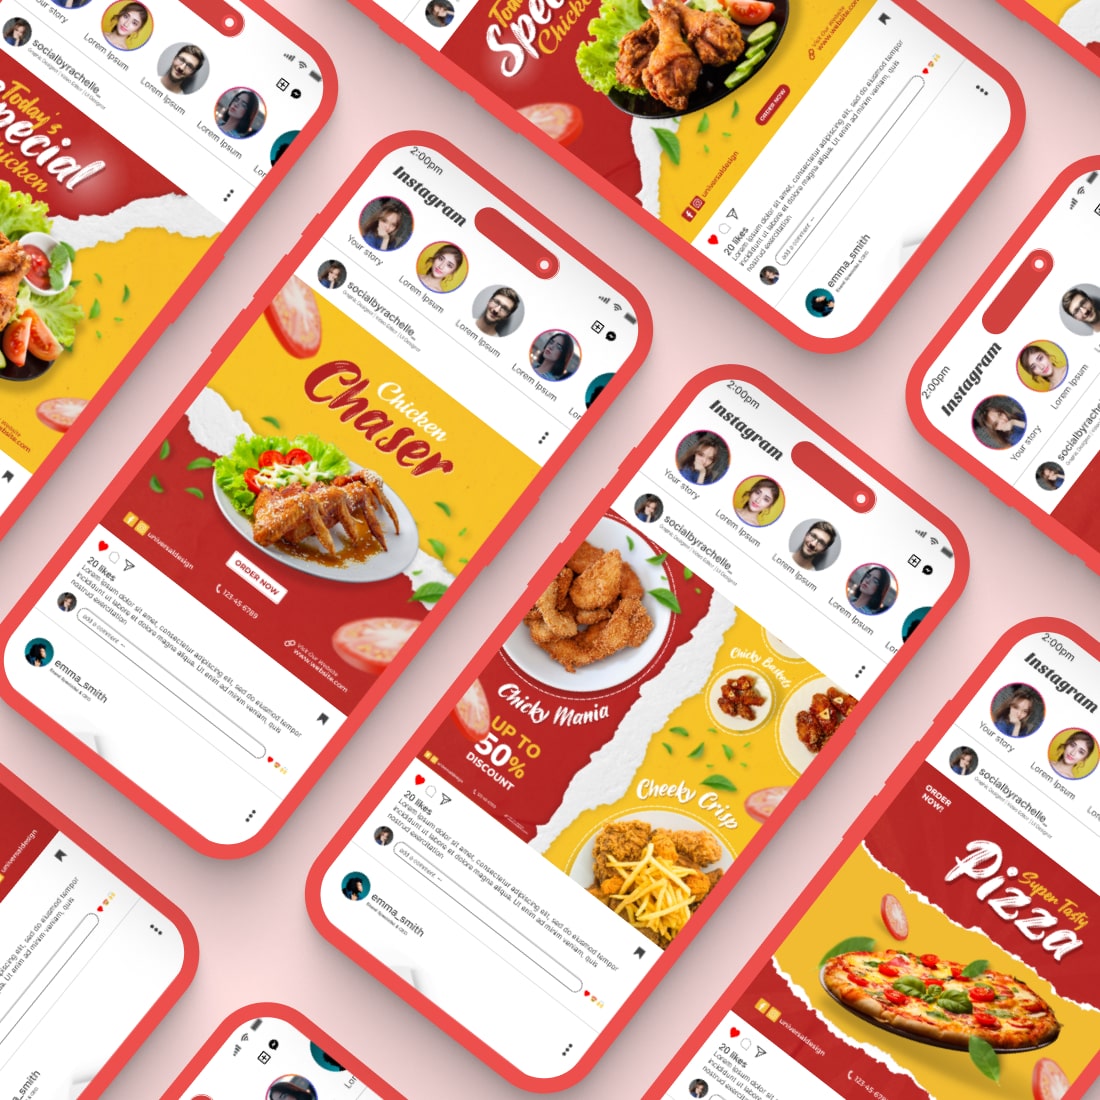 Templates for superb food social media banners/flyers cover image.